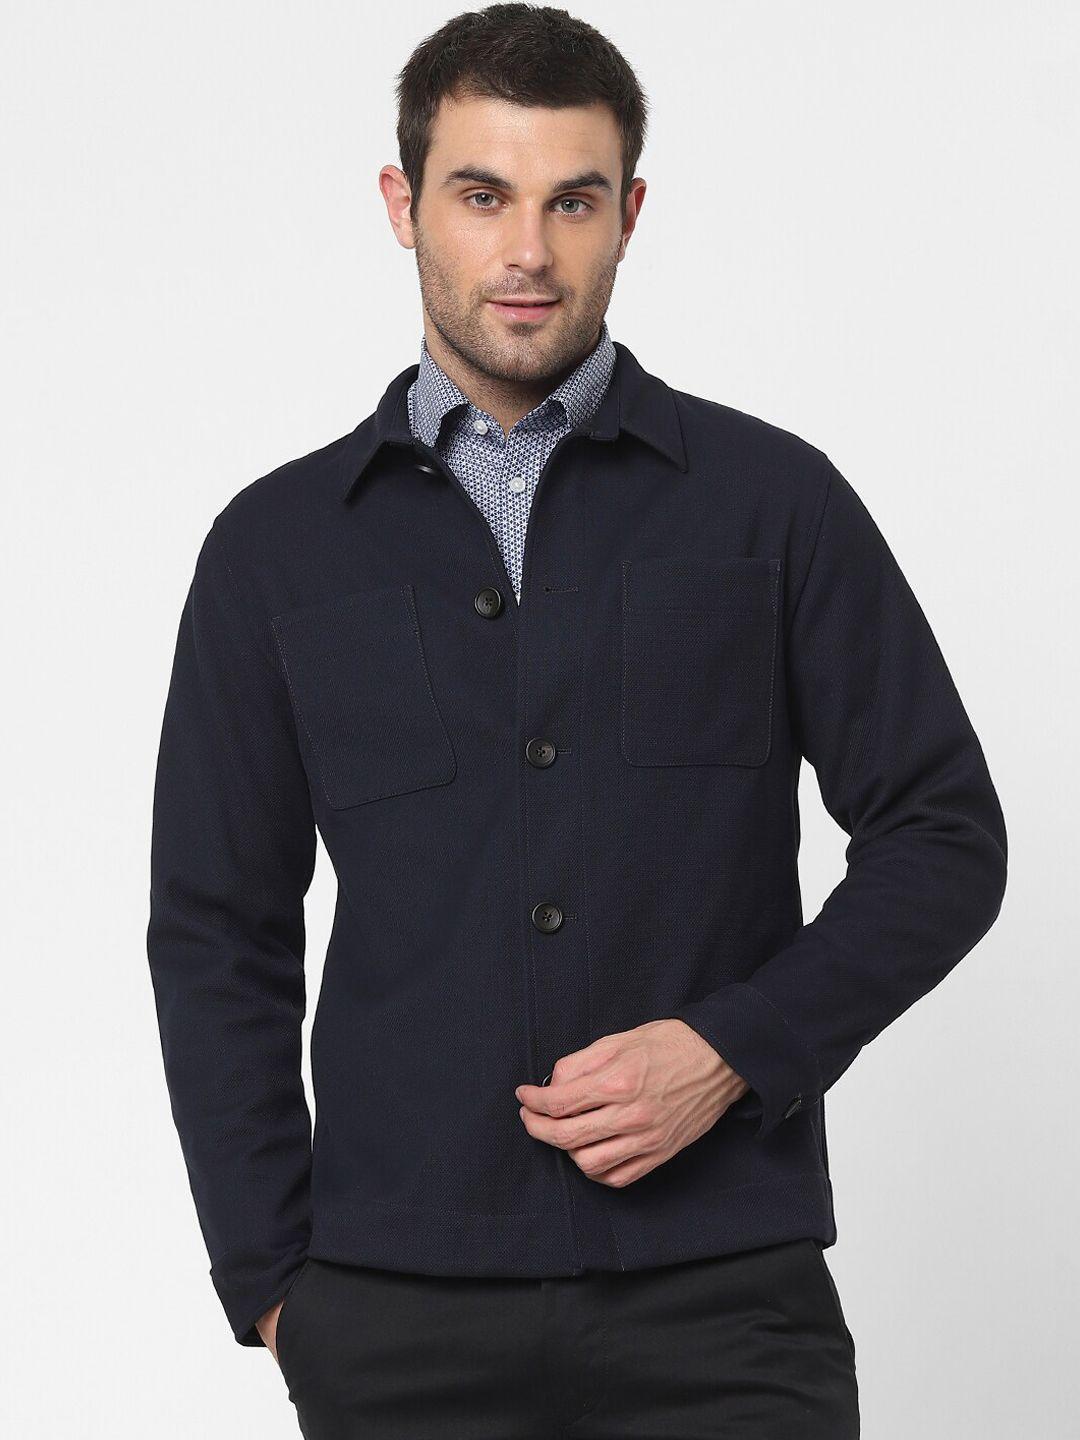 selected men navy blue solid tailored jacket